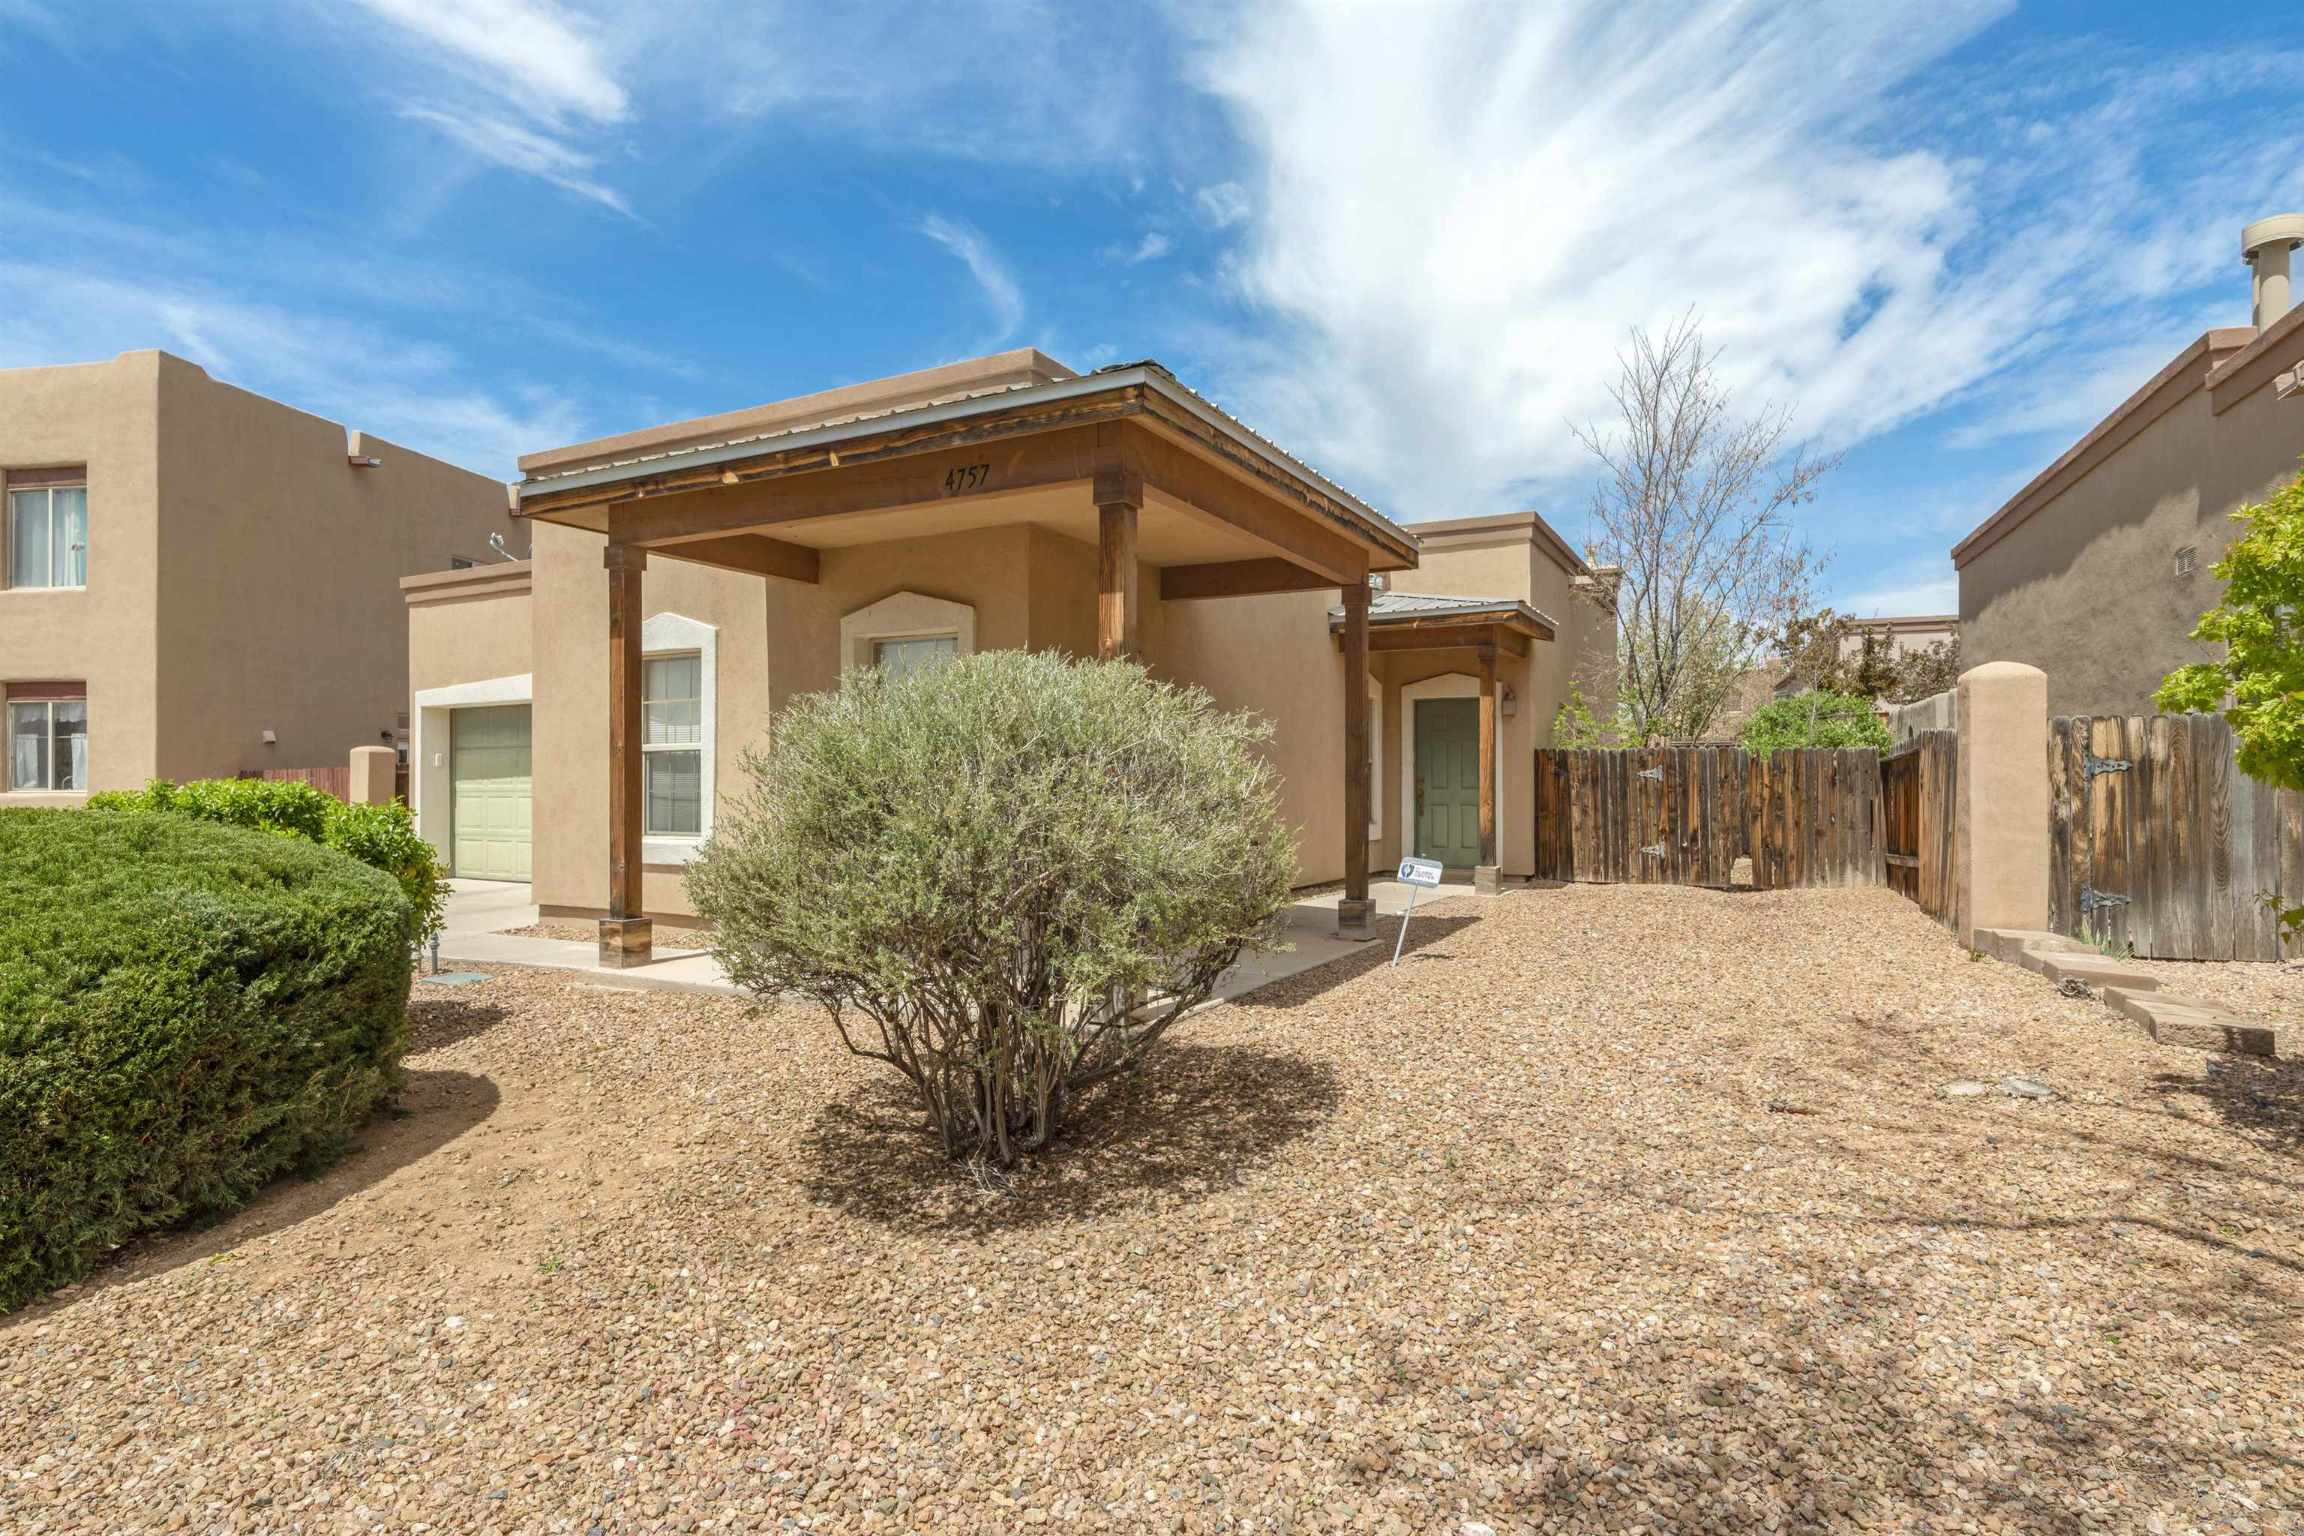 4757 Highlands, Santa Fe, New Mexico 87507, 3 Bedrooms Bedrooms, ,2 BathroomsBathrooms,Residential,For Sale,4757 Highlands,202201480